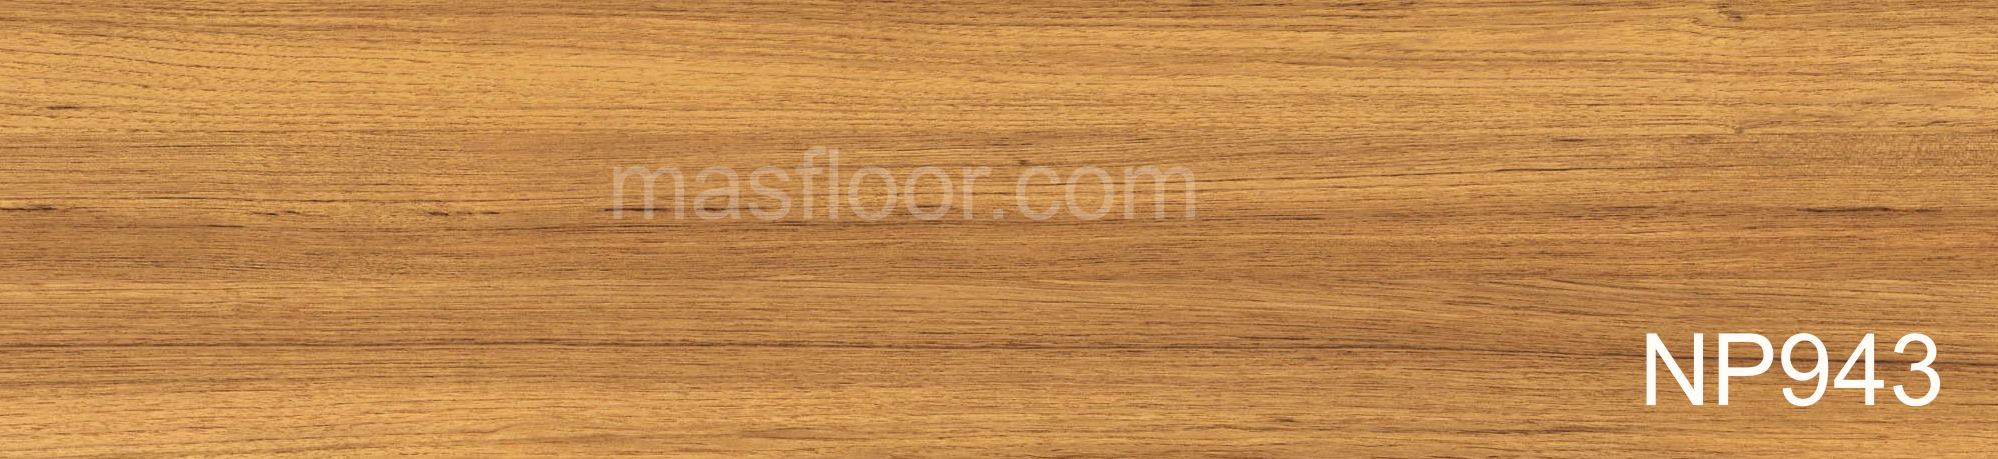 Sàn gỗ Masfloor ra mắt dòng sản phẩm NP Collectione – Made in Malaysia